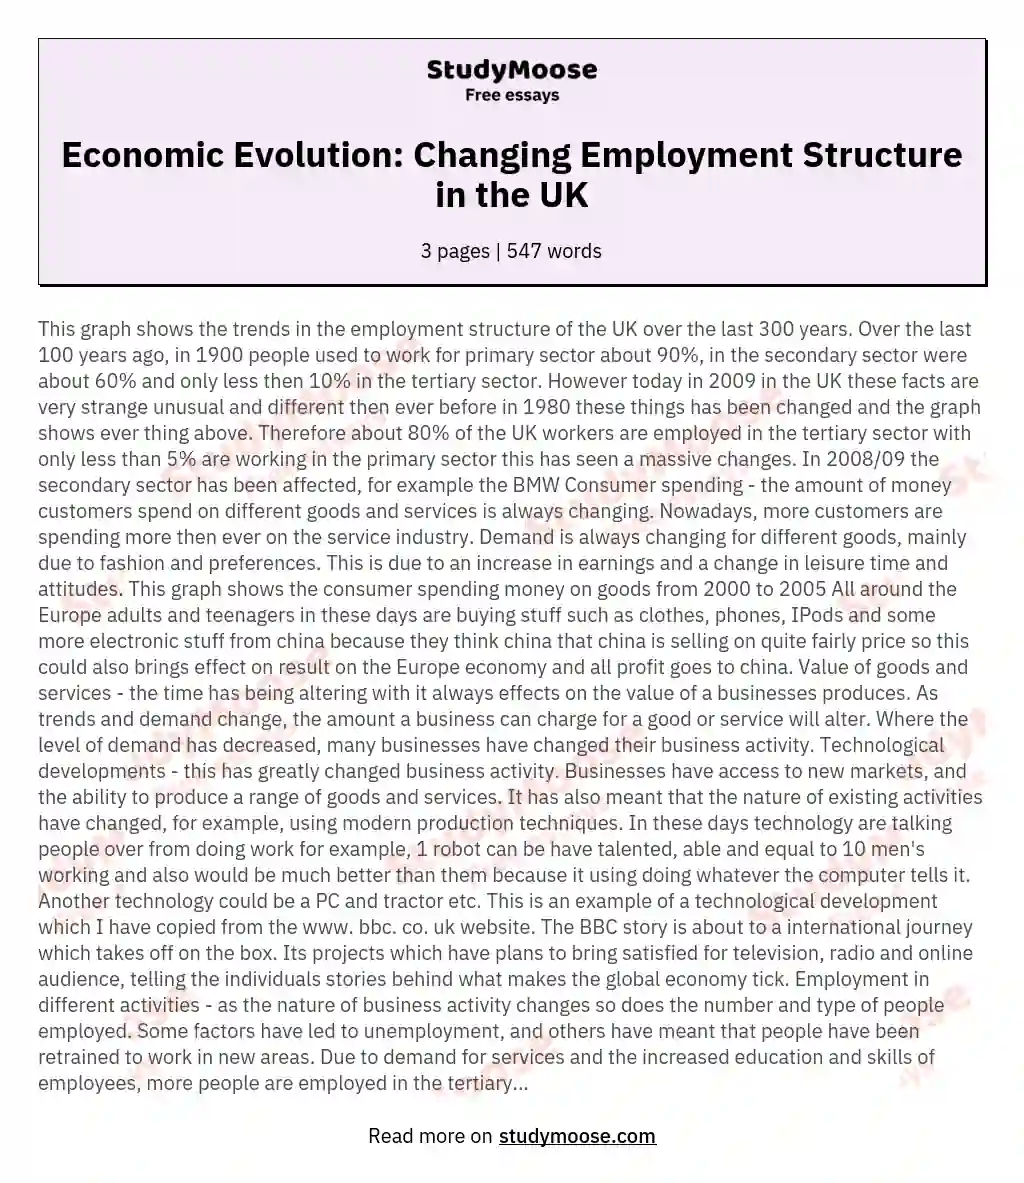 Economic Evolution: Changing Employment Structure in the UK essay